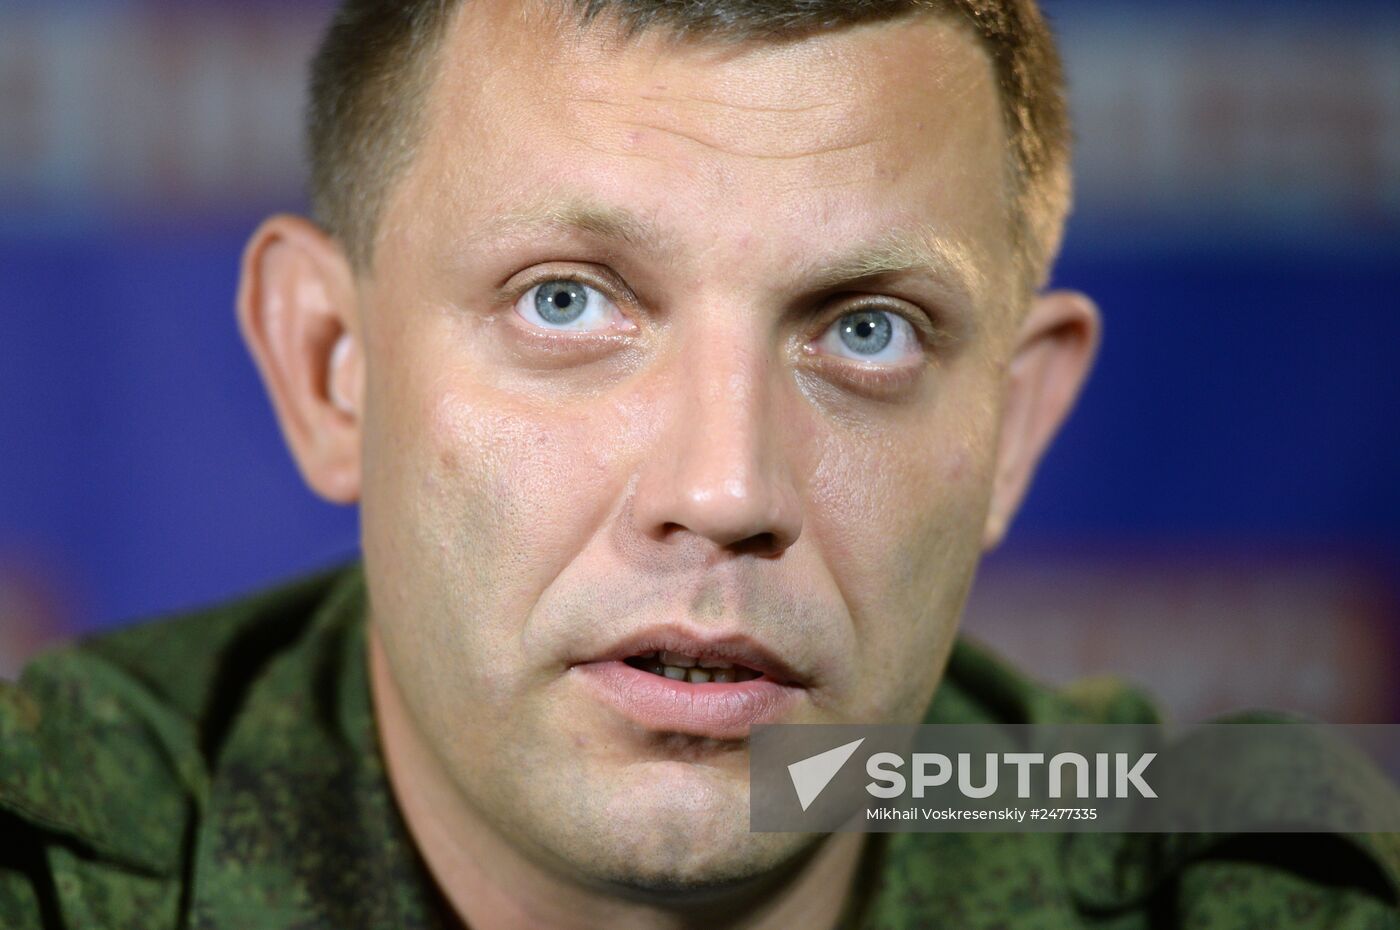 Briefing by DPR Prime Minister Alexander Zakharchenko in Donetsk